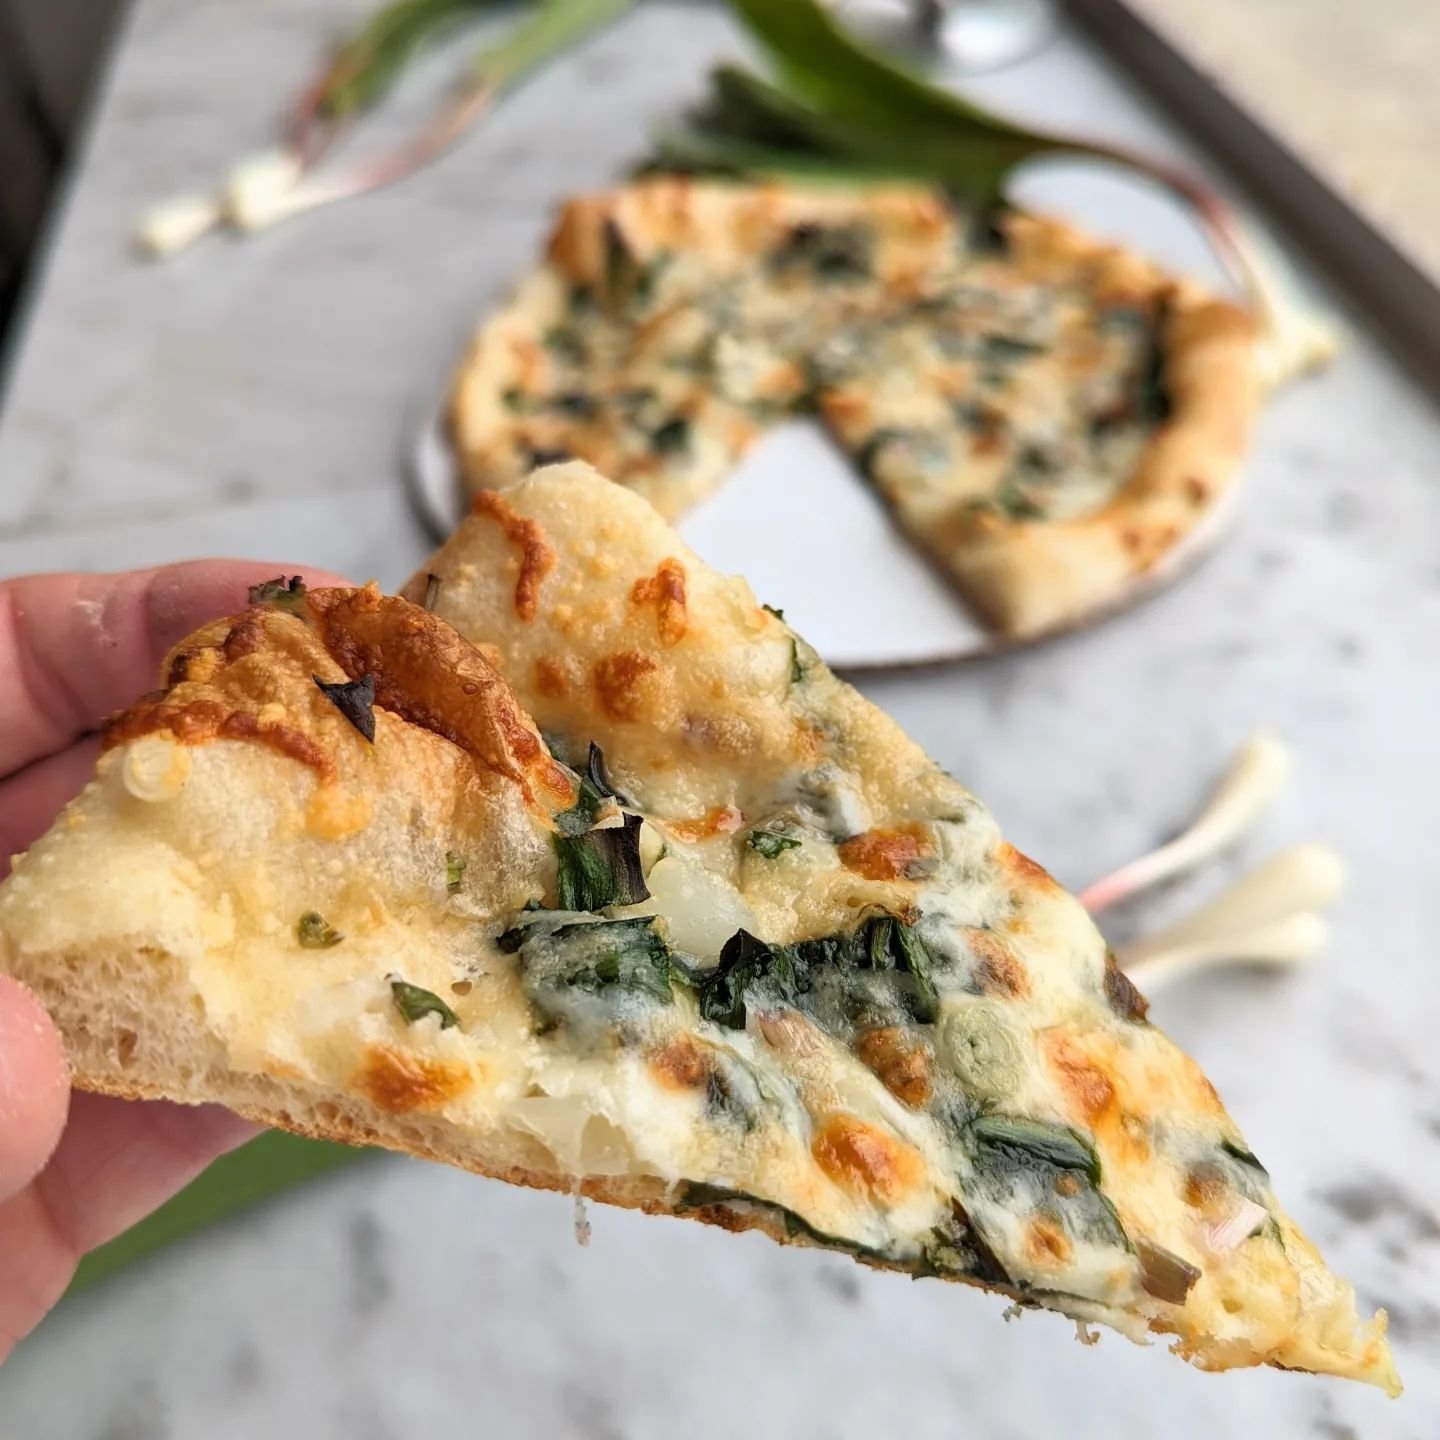 Ramp season means ramp pizza! Not to mention today we're open late so you can even get it for dinner! Stop by for a loaf on your way home from work, pick up a pizza to go, or stay for a pretzel and pie while you watch the new professional women's hoc